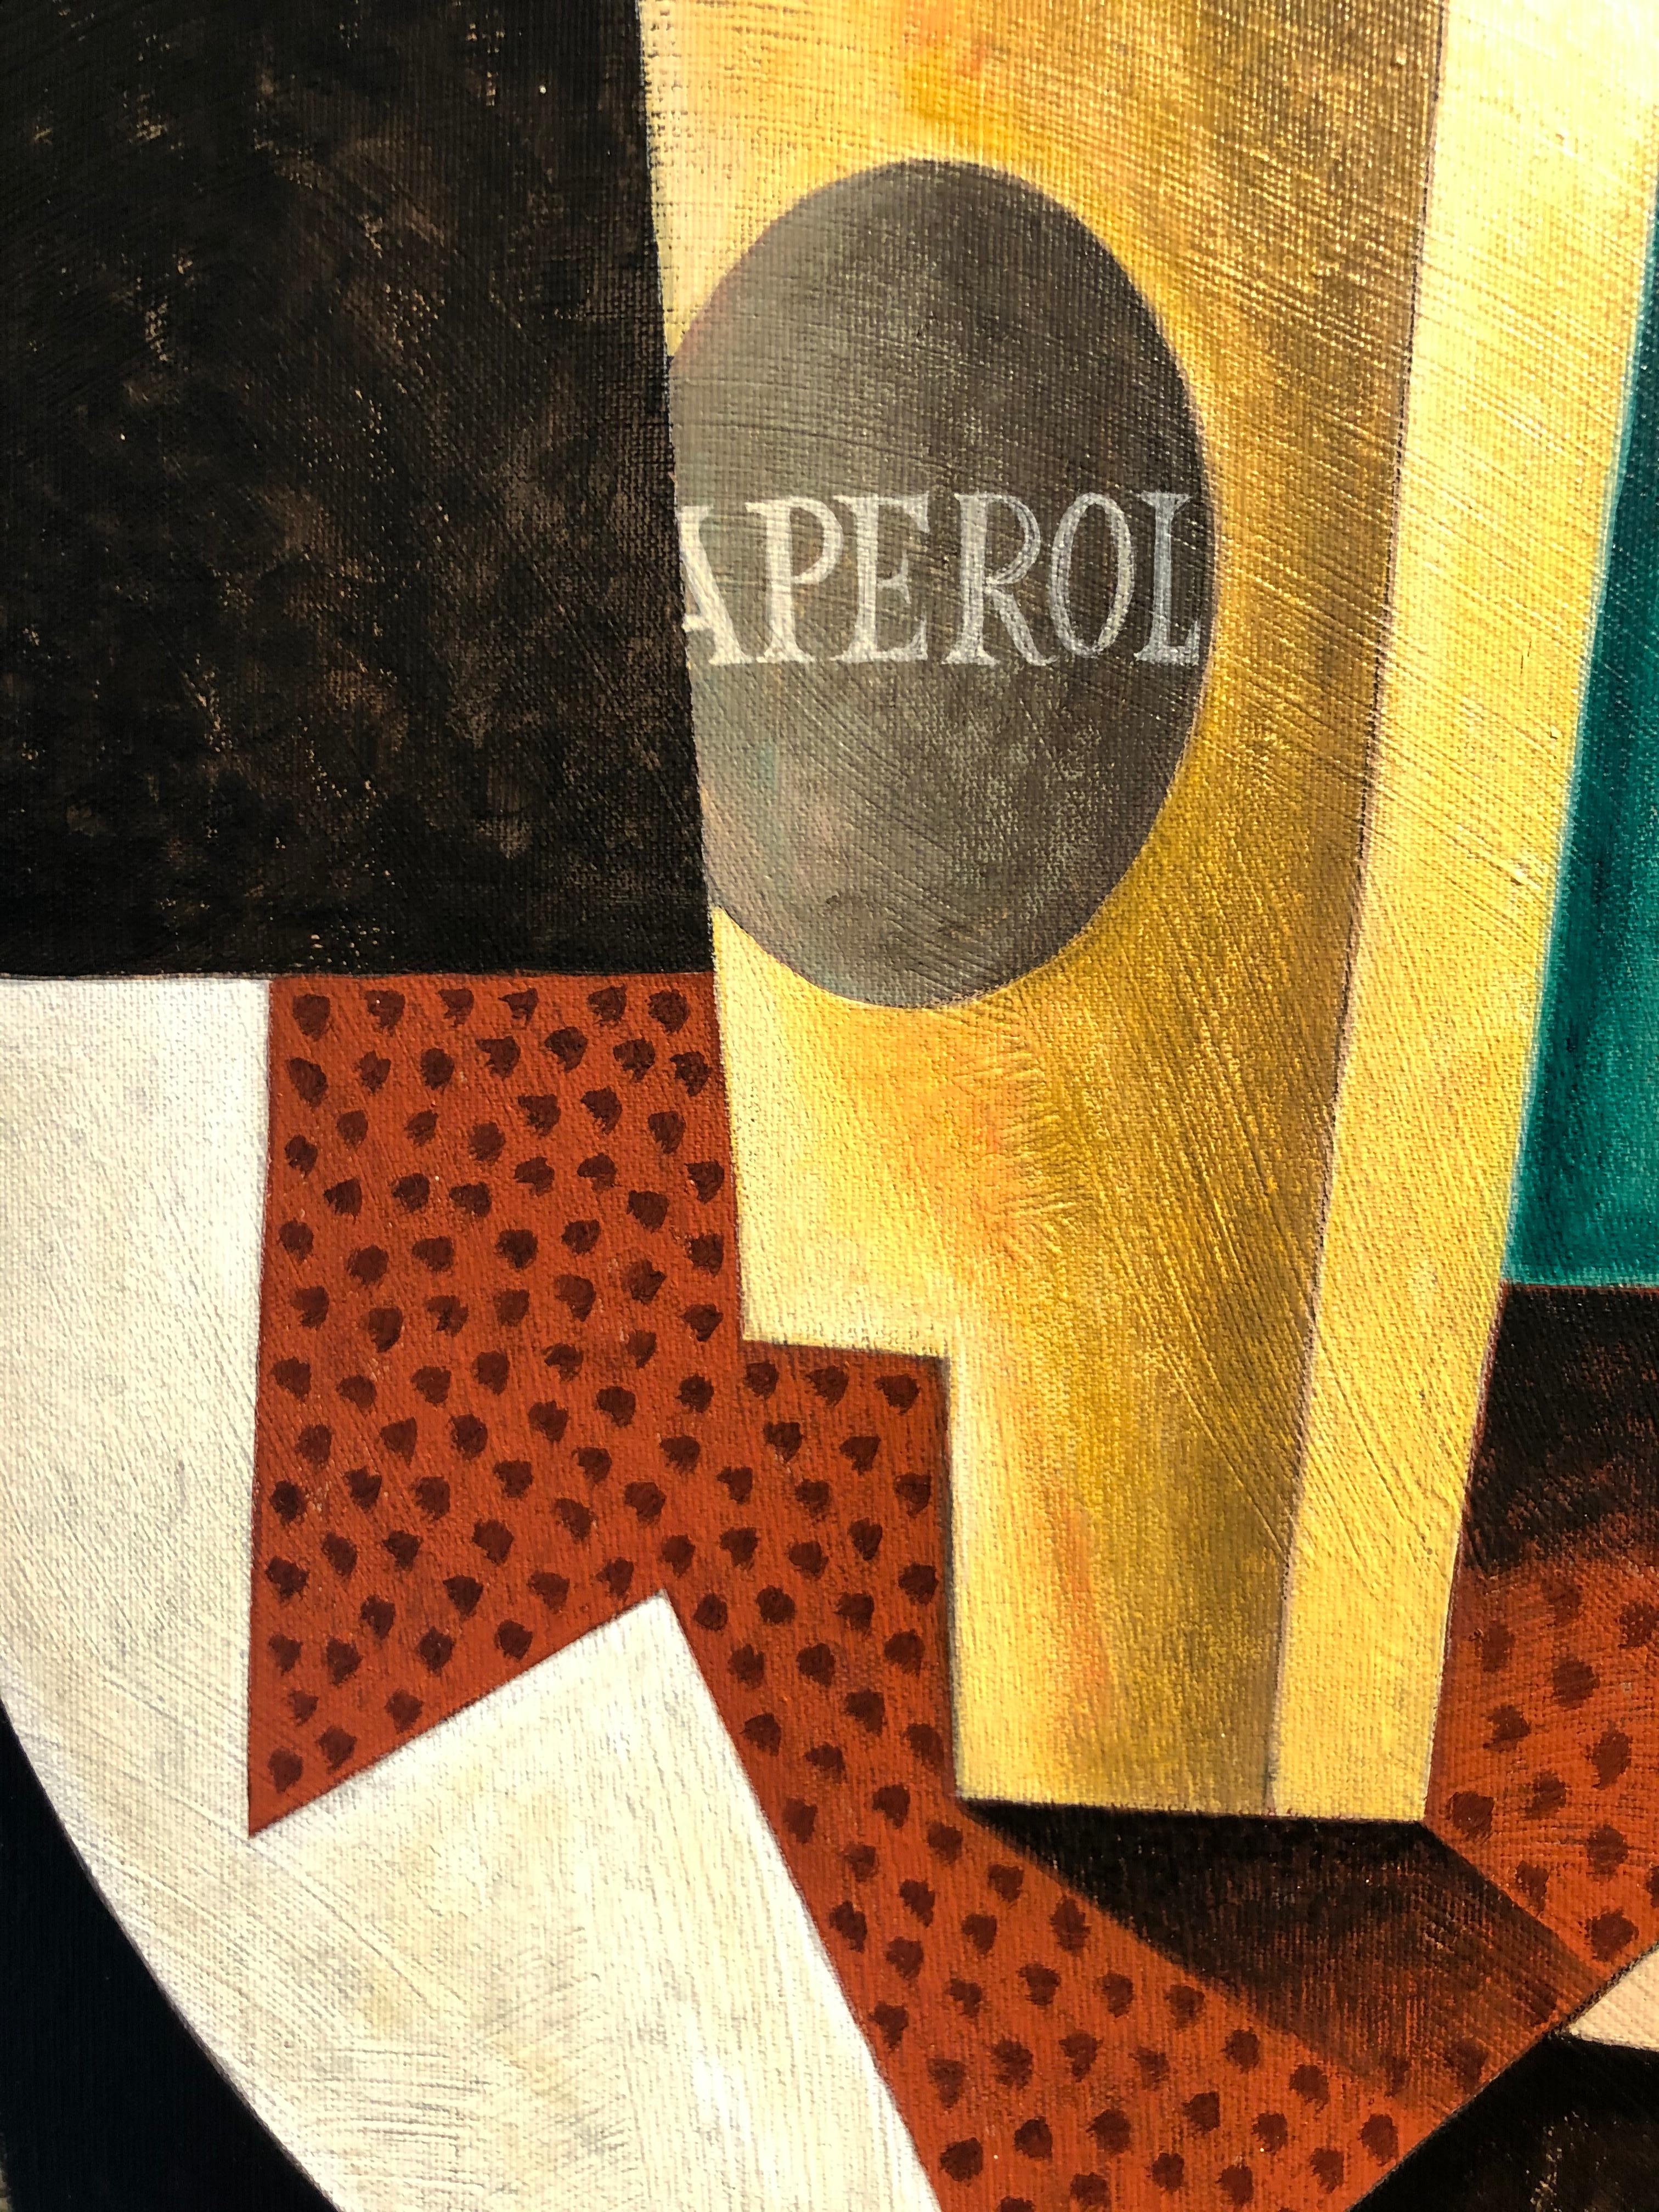 Table With Aperol & Fruits-original  cubism still life painting-contemporary Art For Sale 1